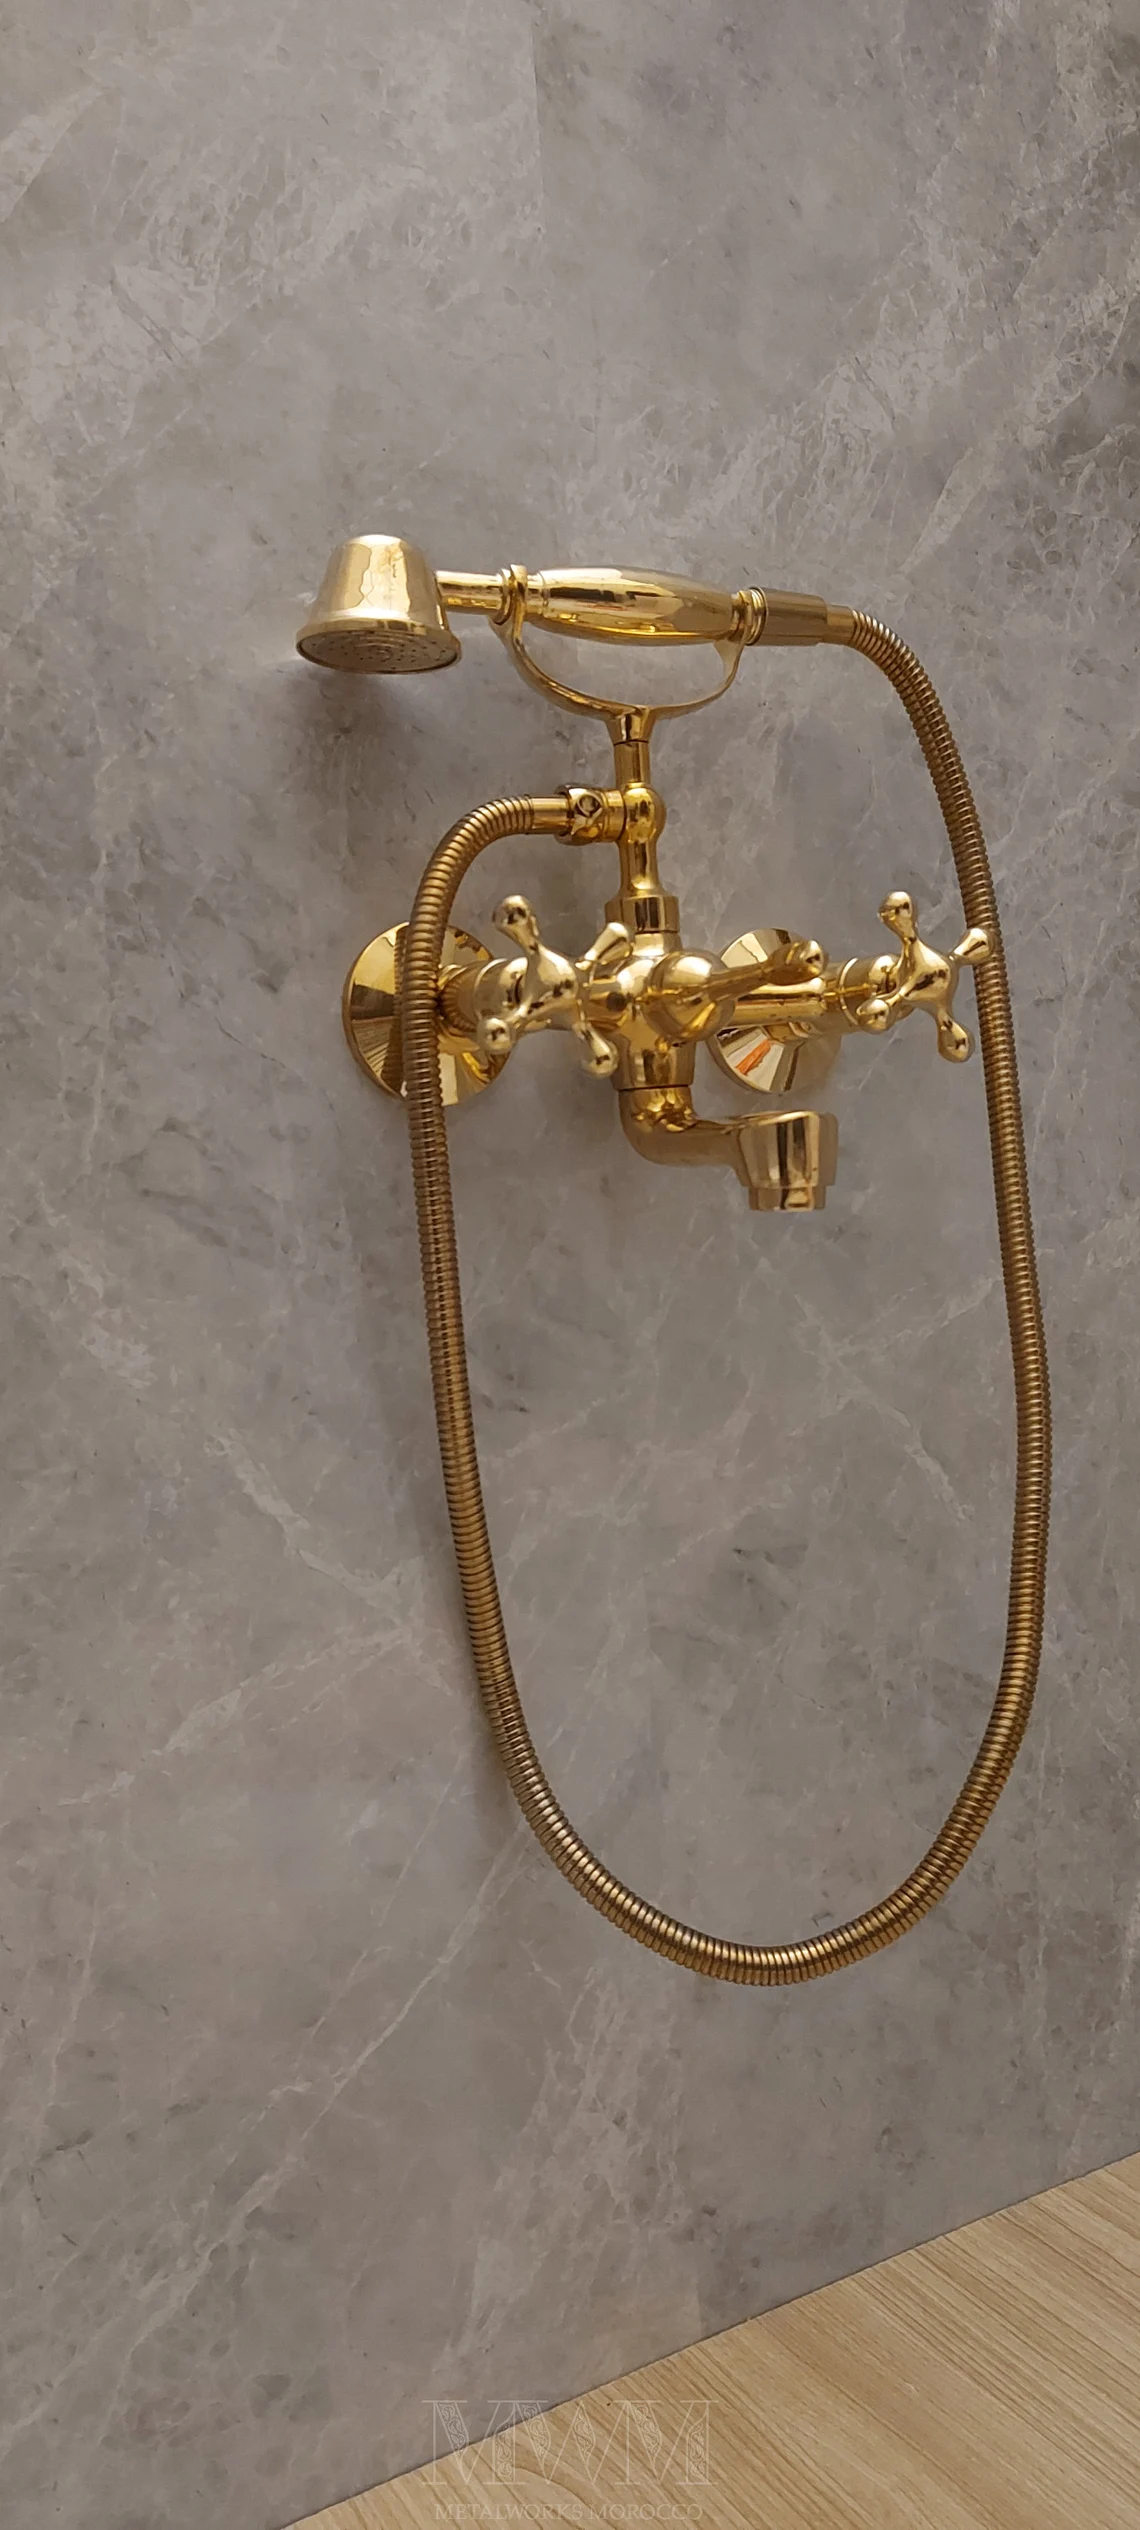 Brass Solid Bathtub Faucet With Horn Diverter